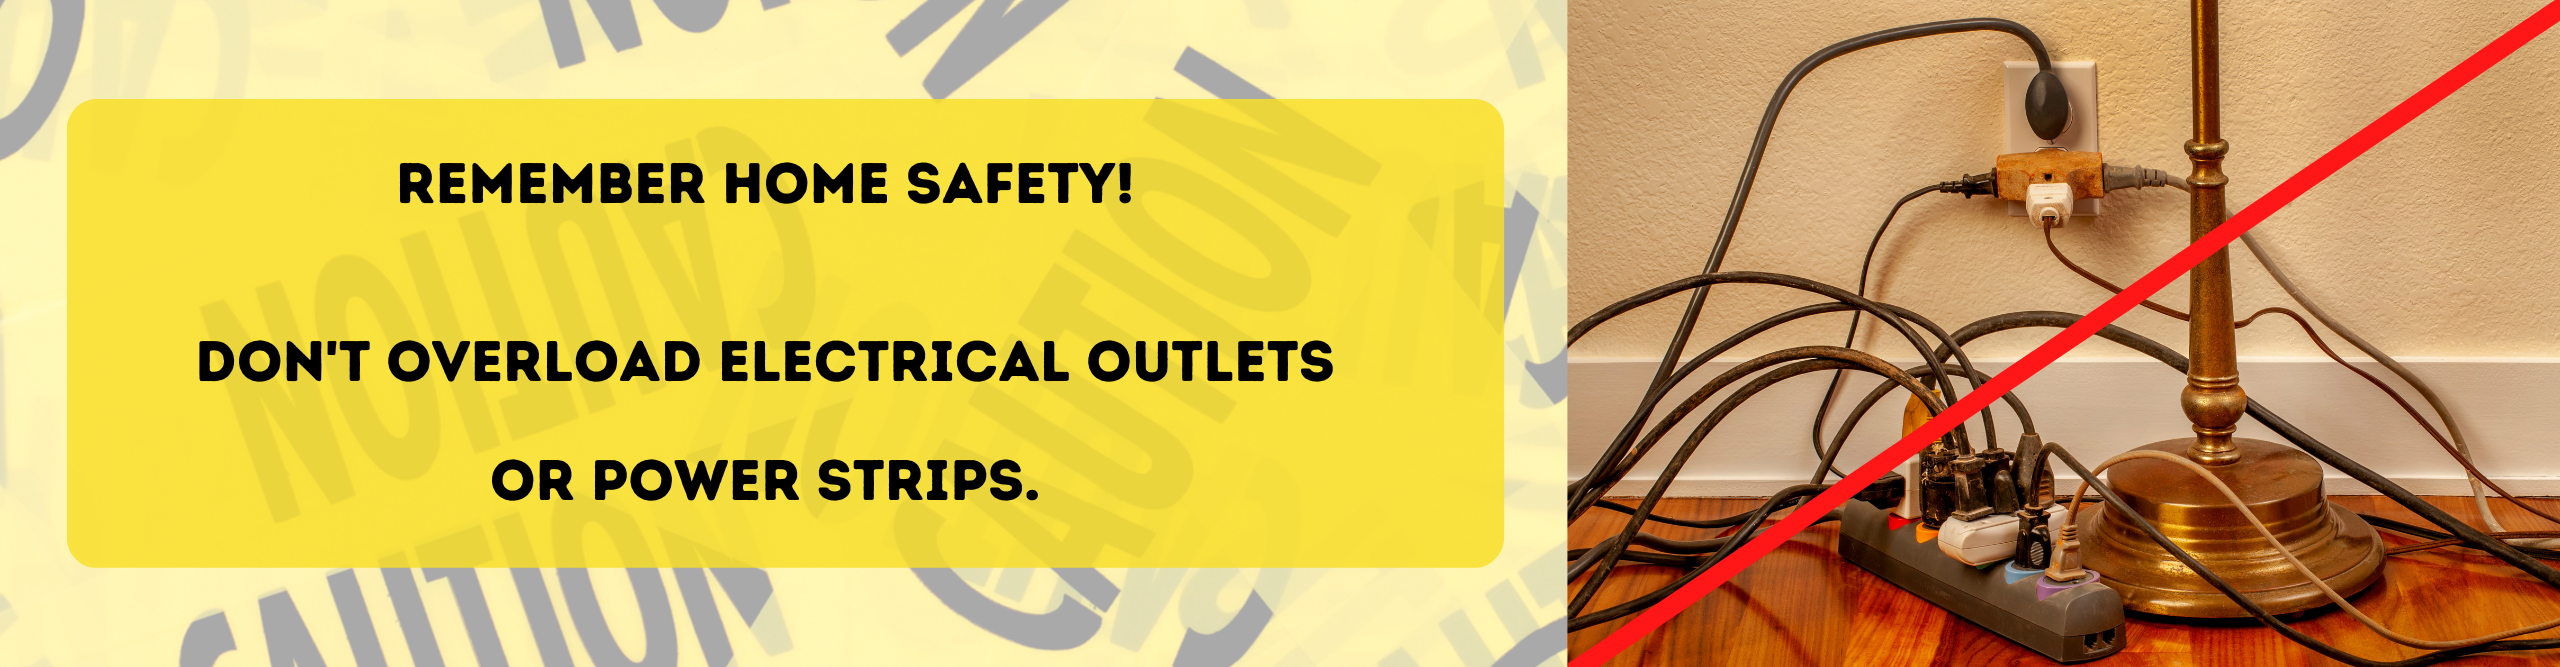 Safety - don't overload outlets